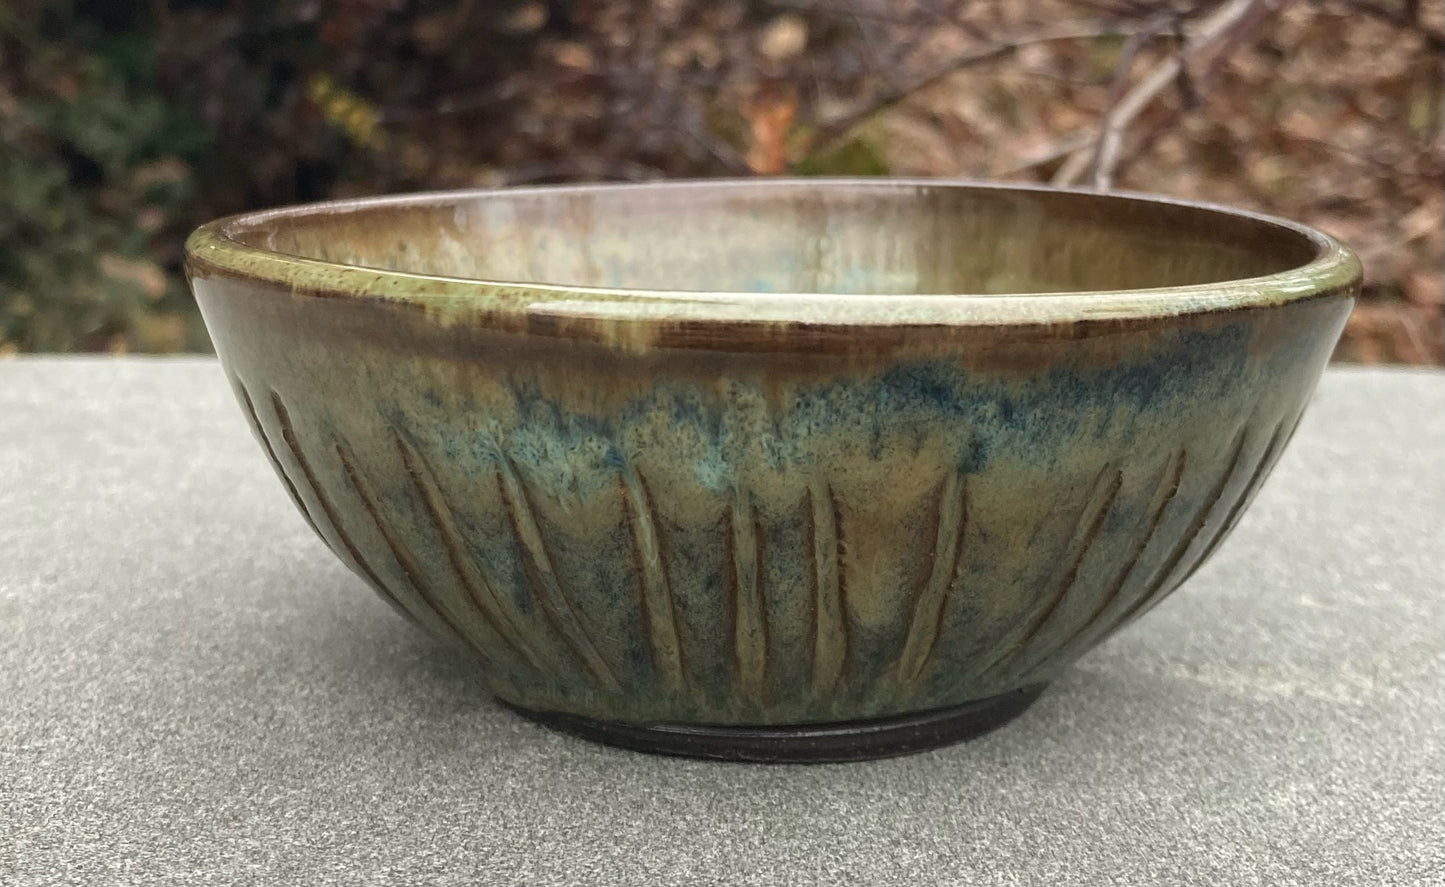 Small Textured Green Bowl